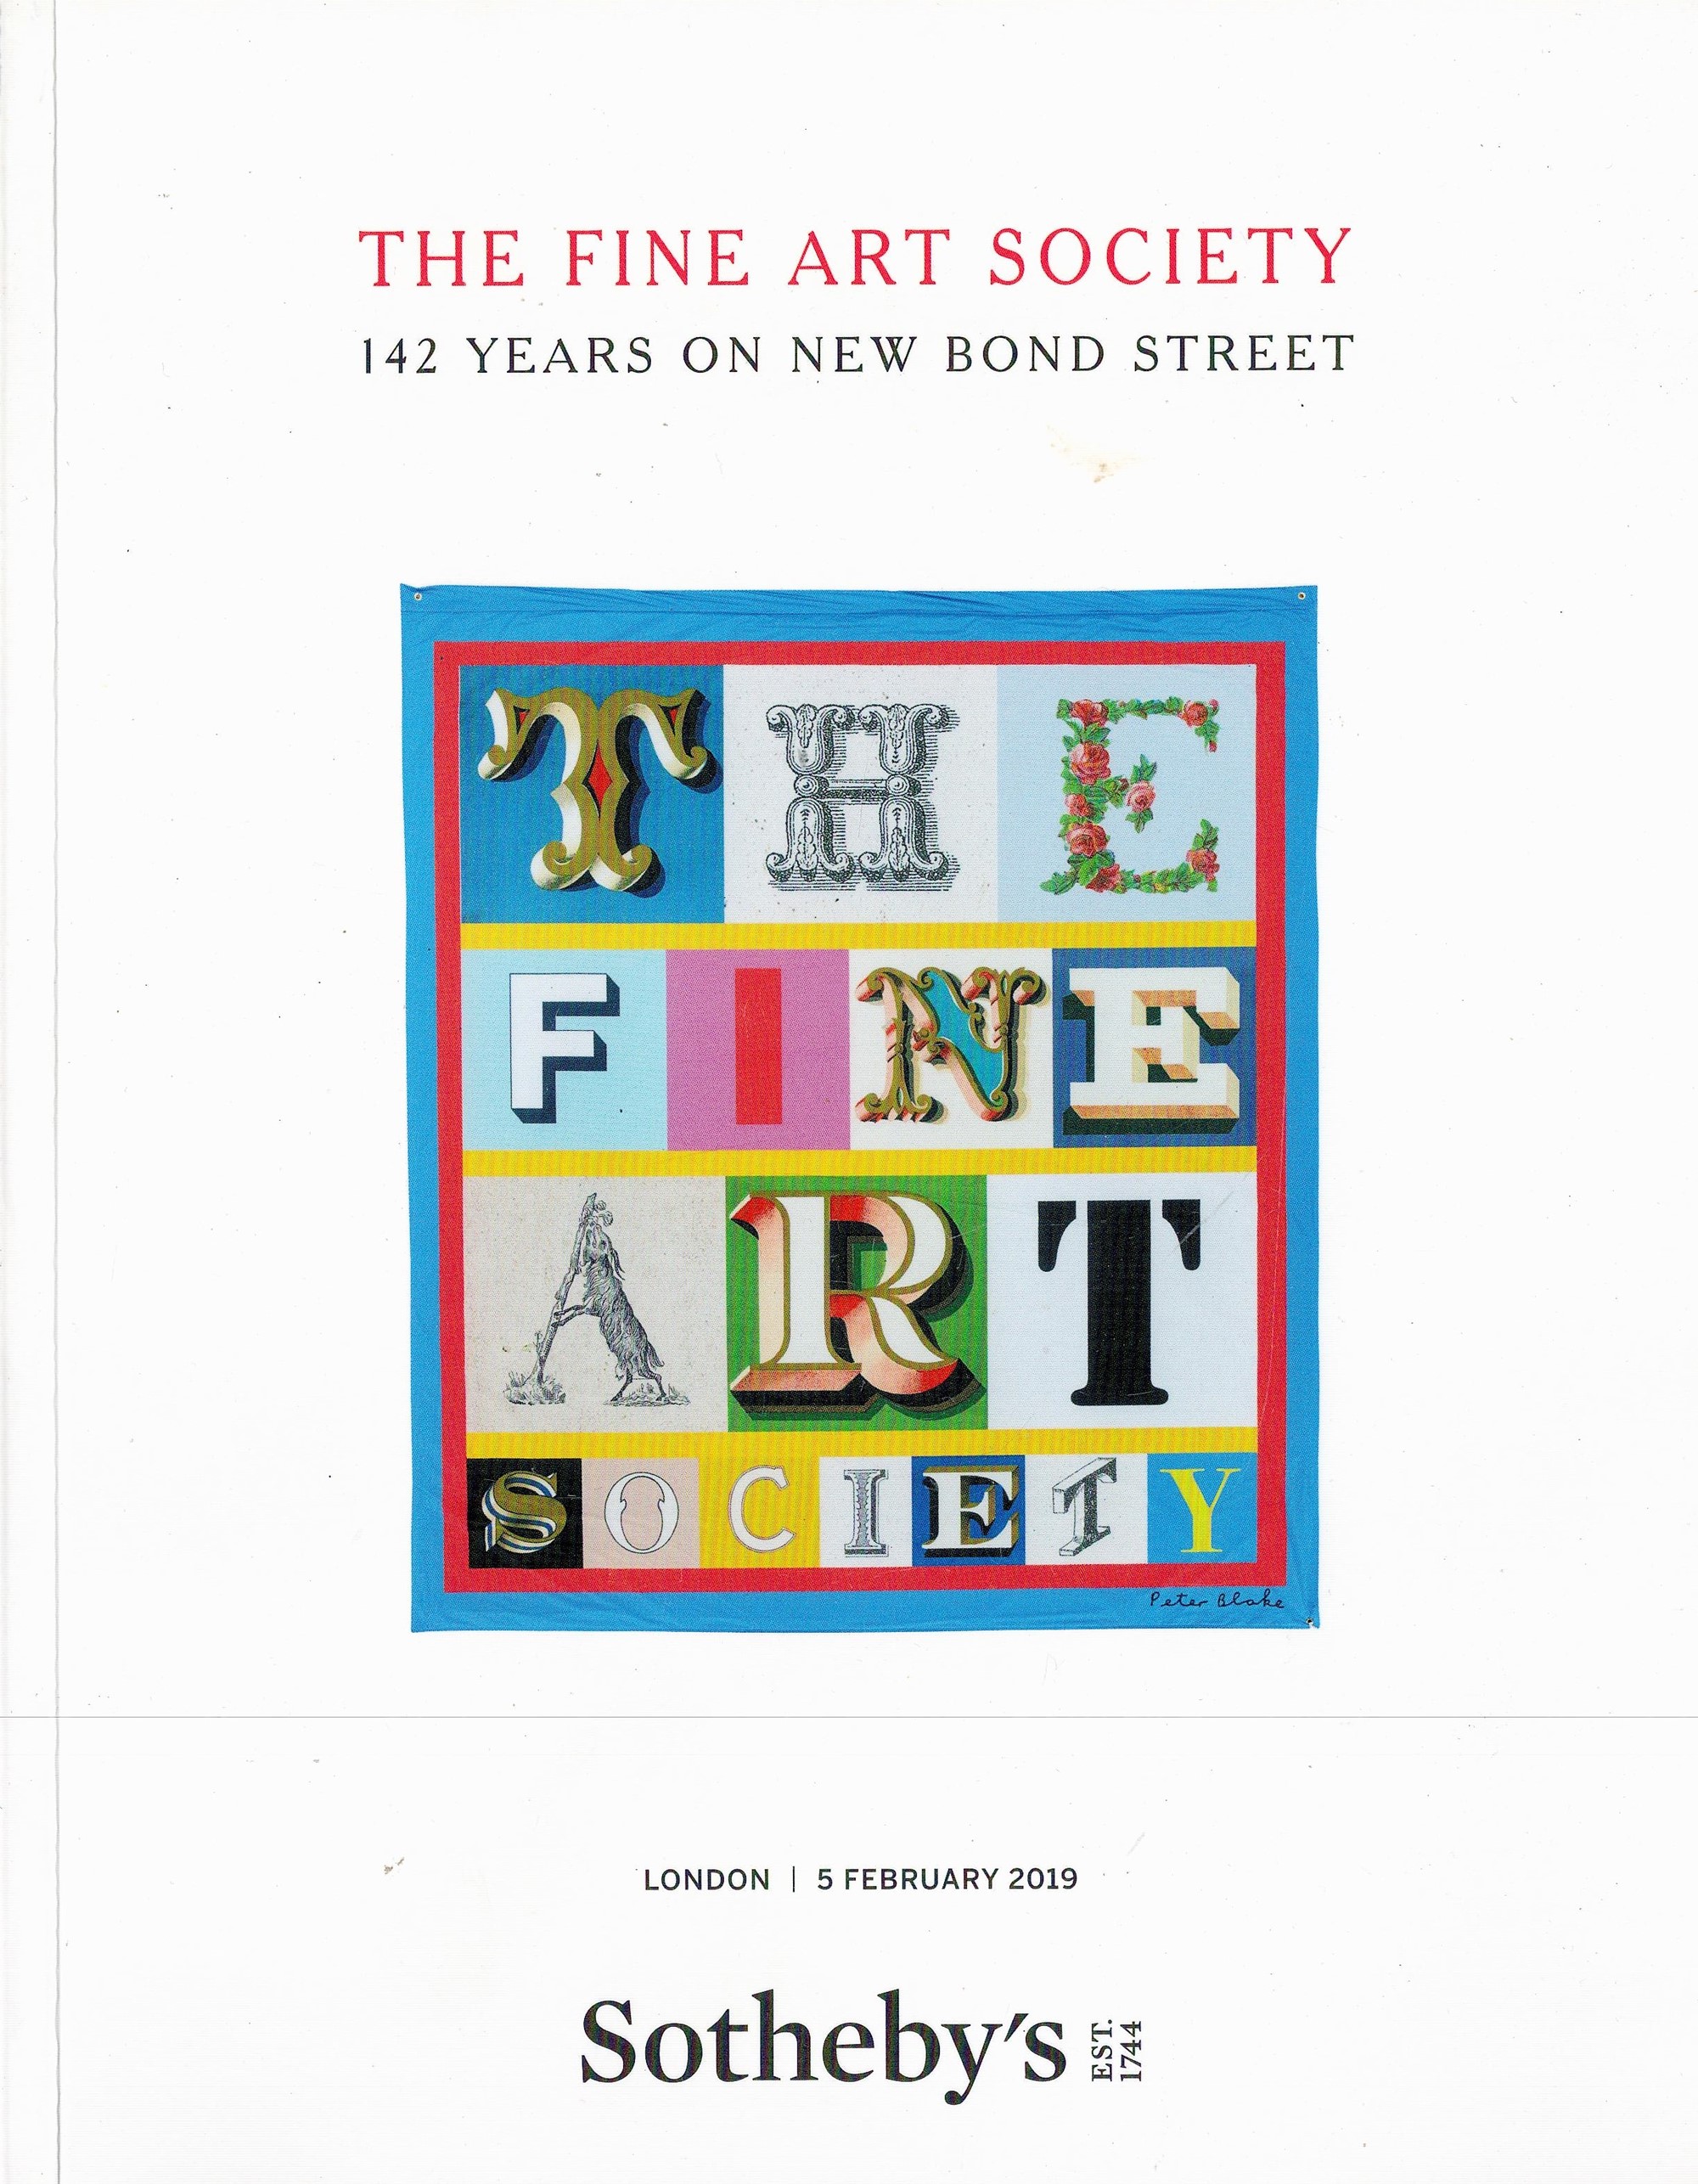 Sotheby's The Fine Art Society 142 Years on New Bond Street Softback Book 2019 First Edition - Image 2 of 4